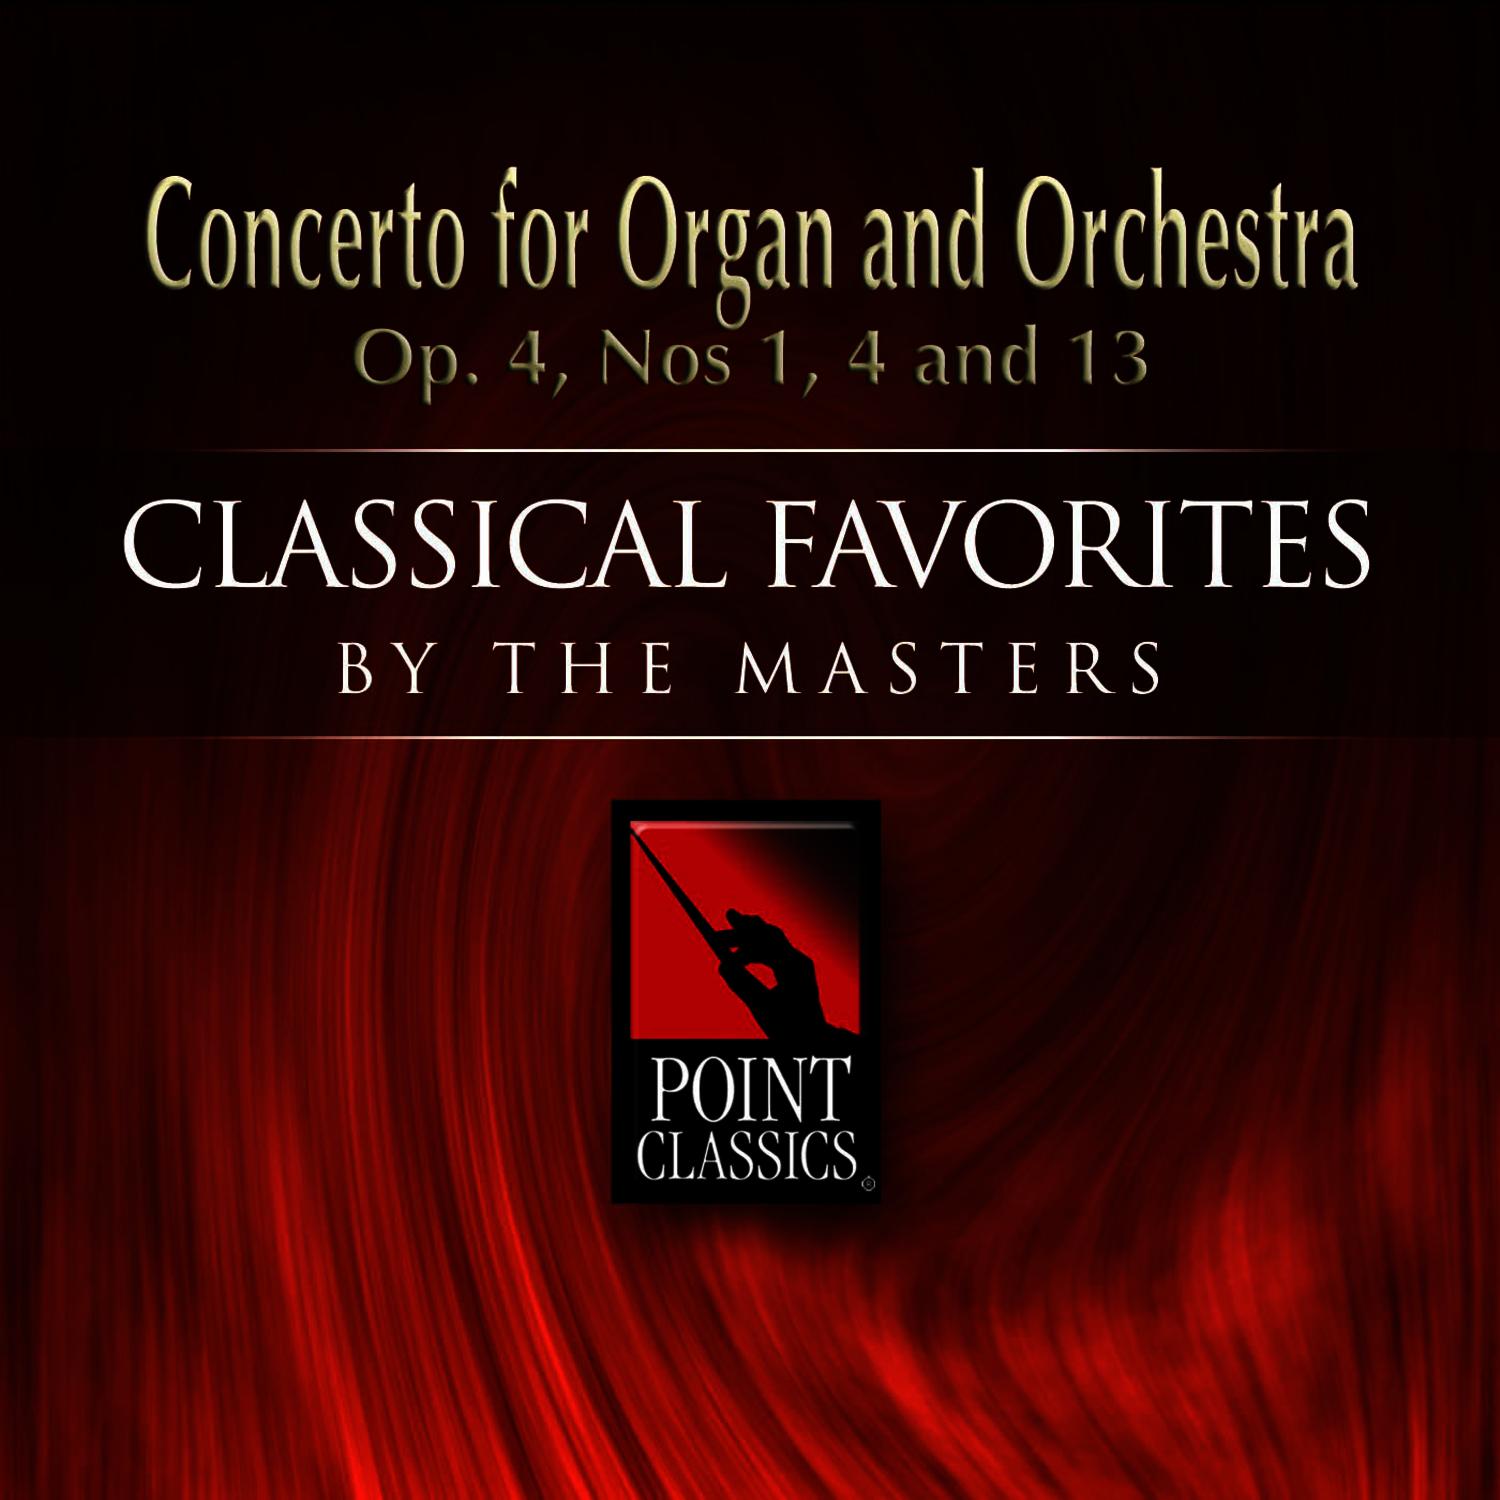 Concerto for Organ and Orchestra Op. 4  No. 4 in F Major: Allegro